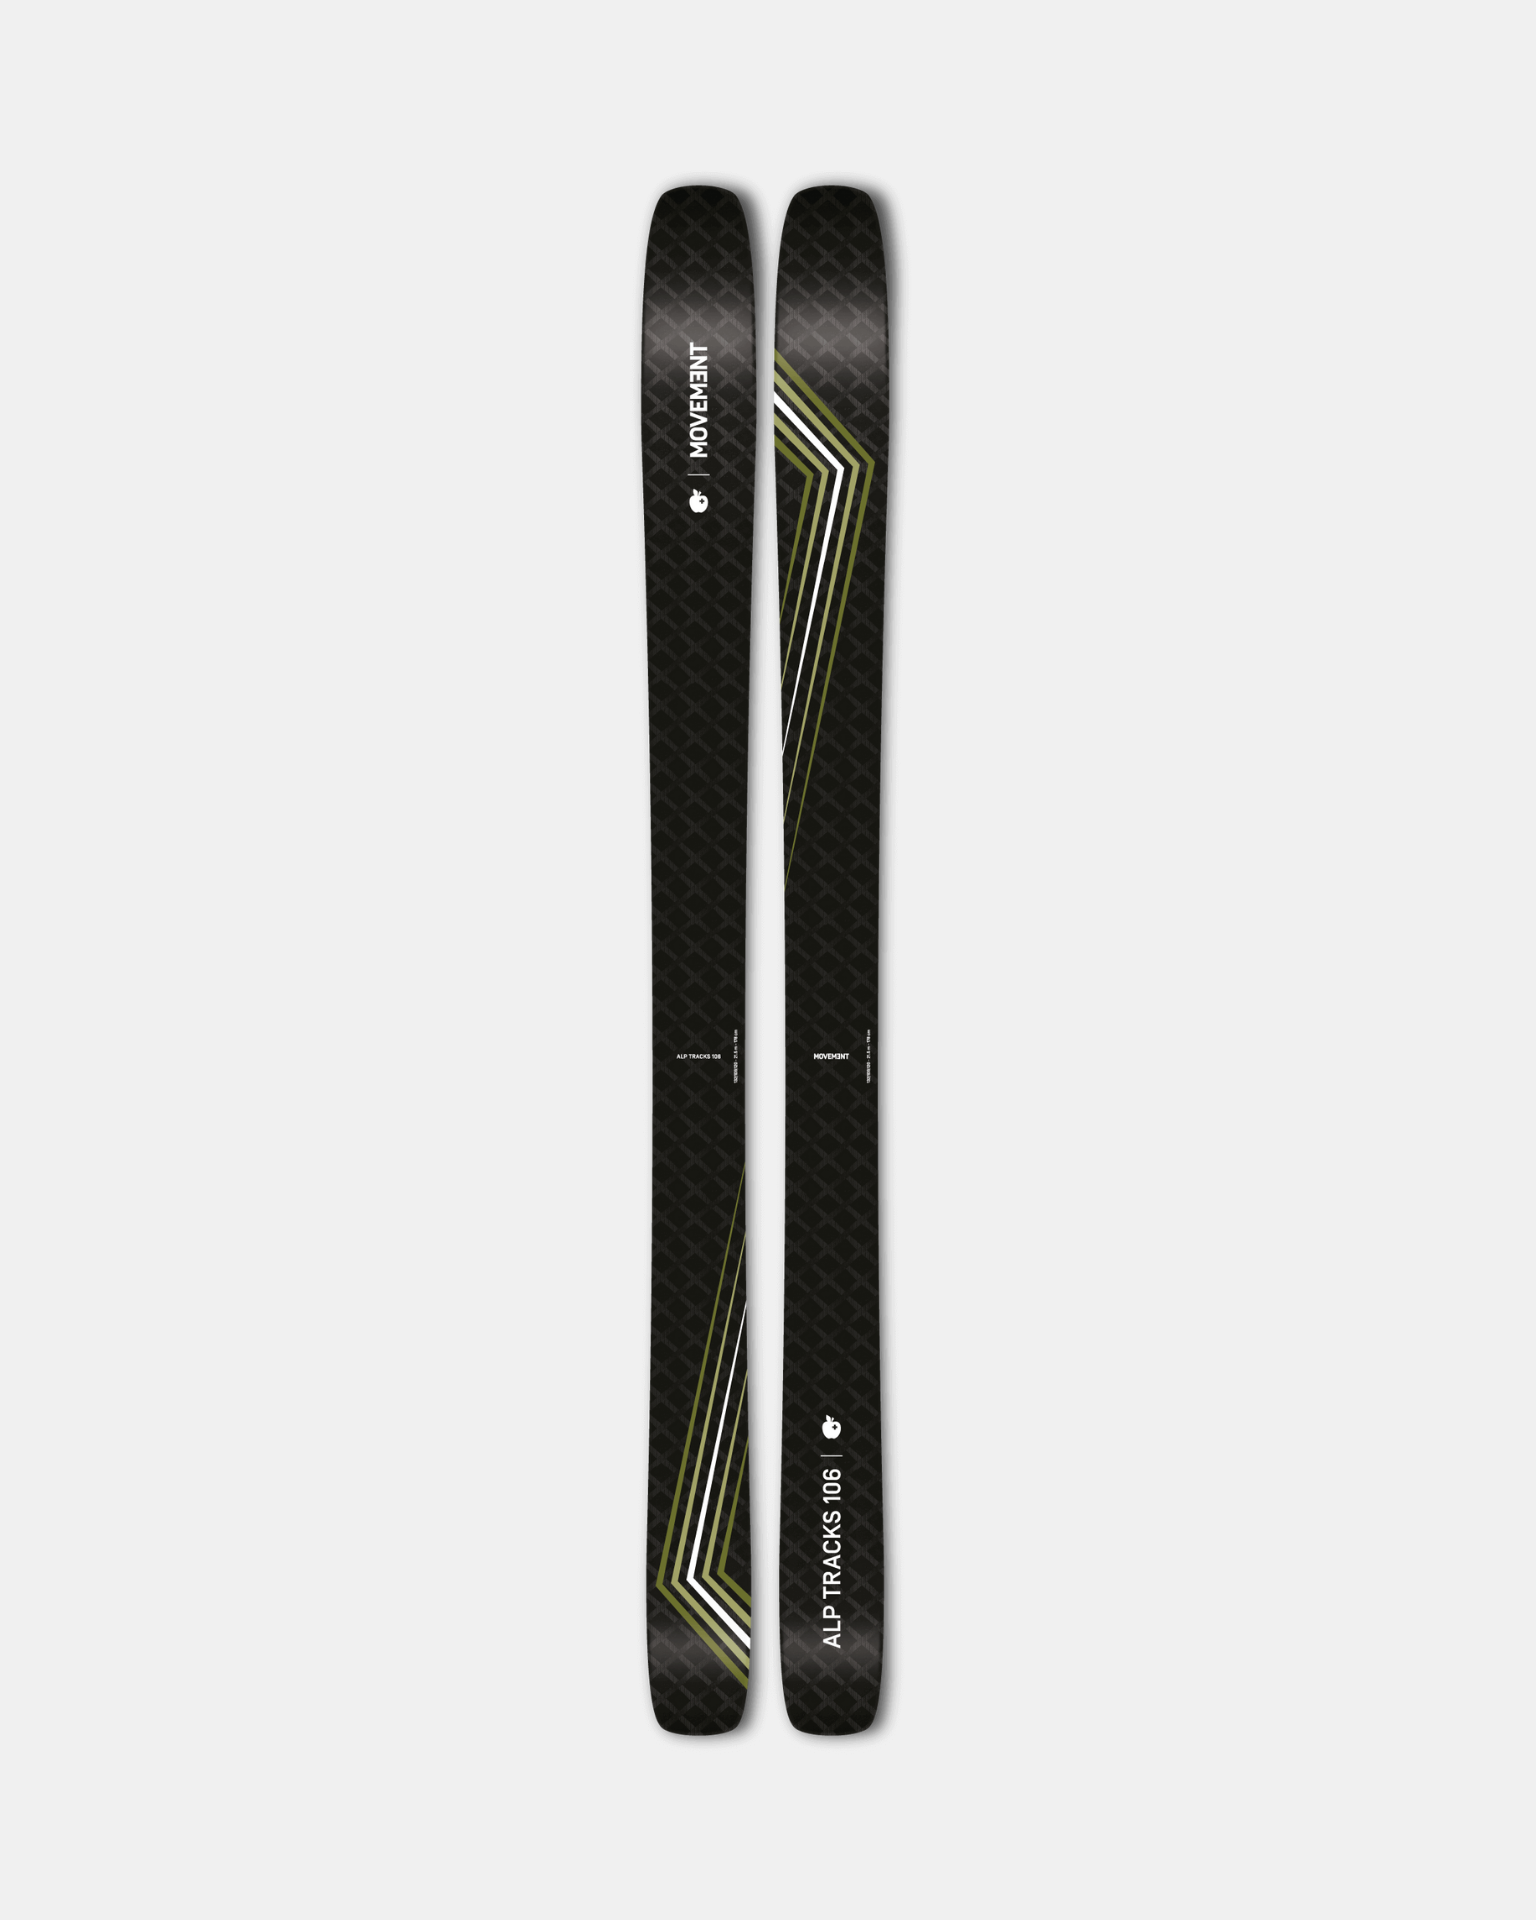 Embark on unforgettable touring adventures with Movement&#39;s Alp Tracks 106 skis.